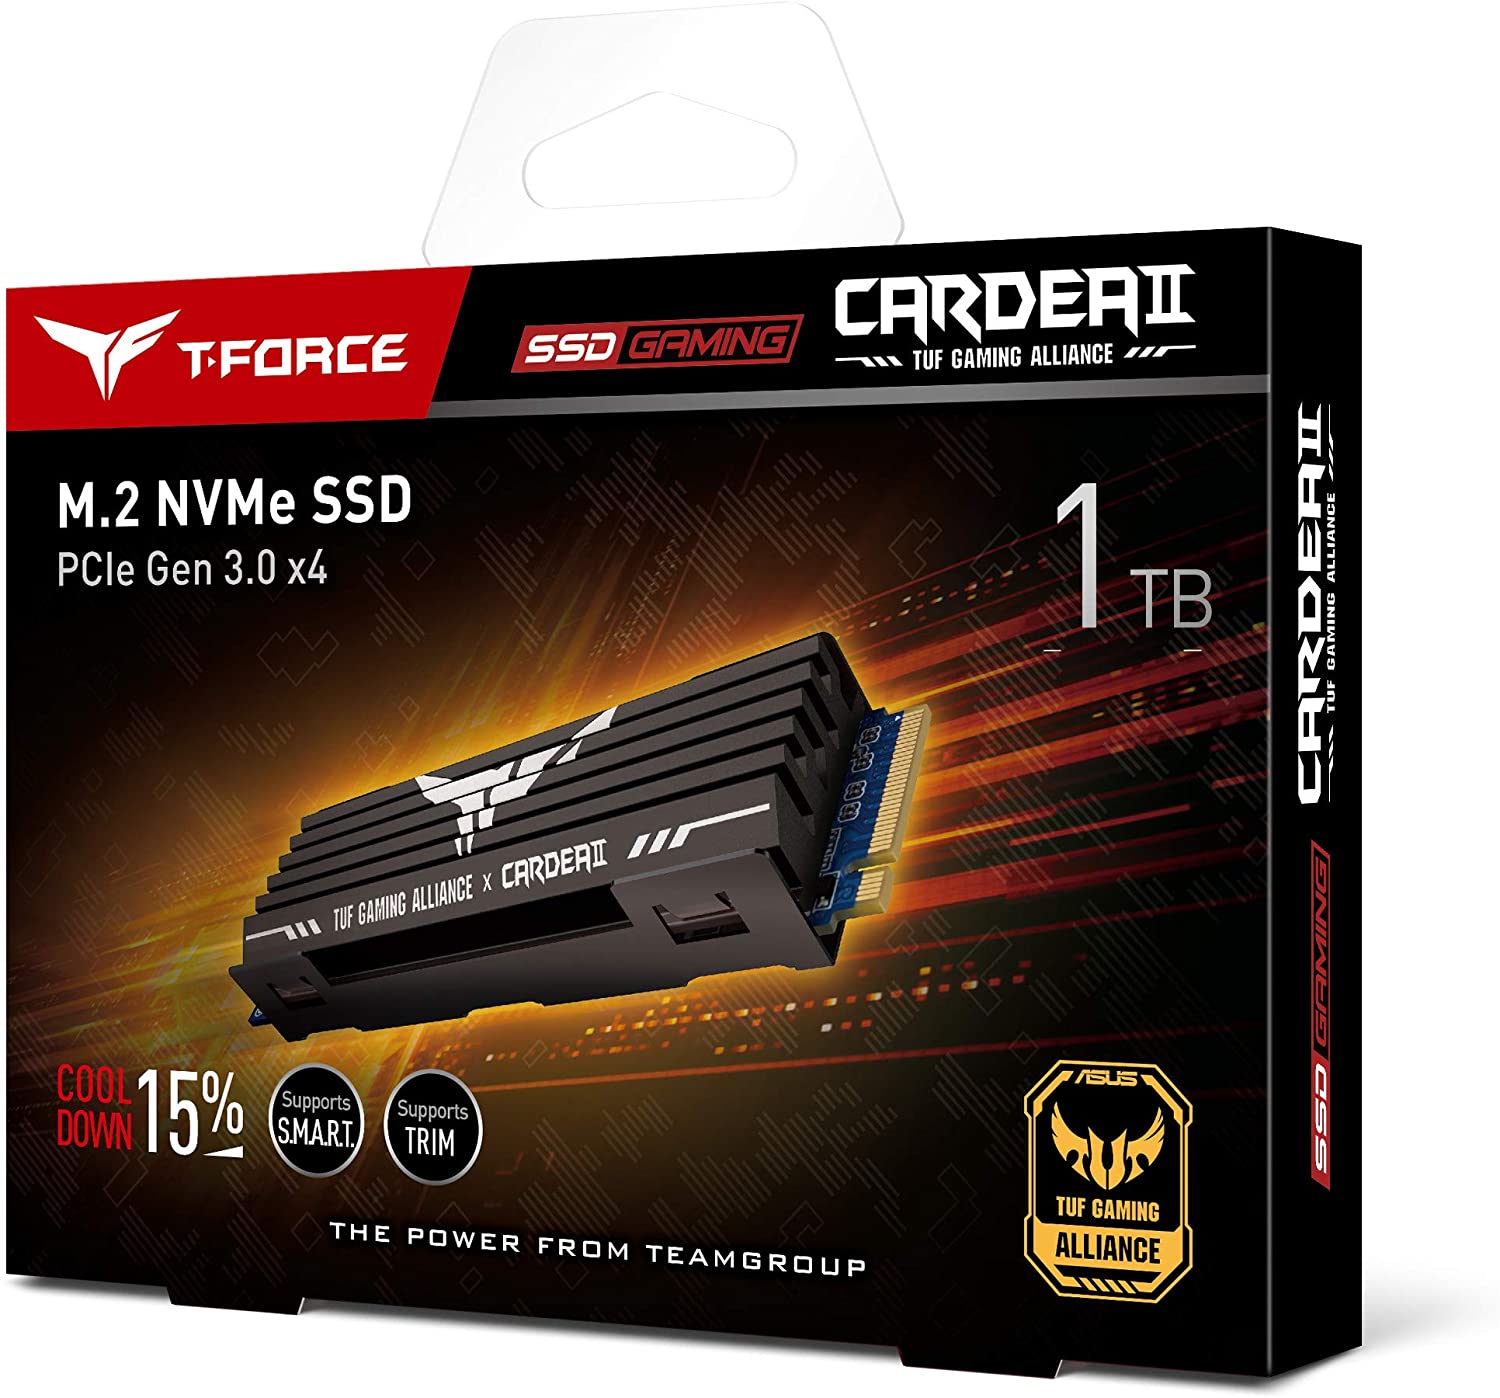 Disque SSD Cardea II TUF Gaming Alliance T-Force